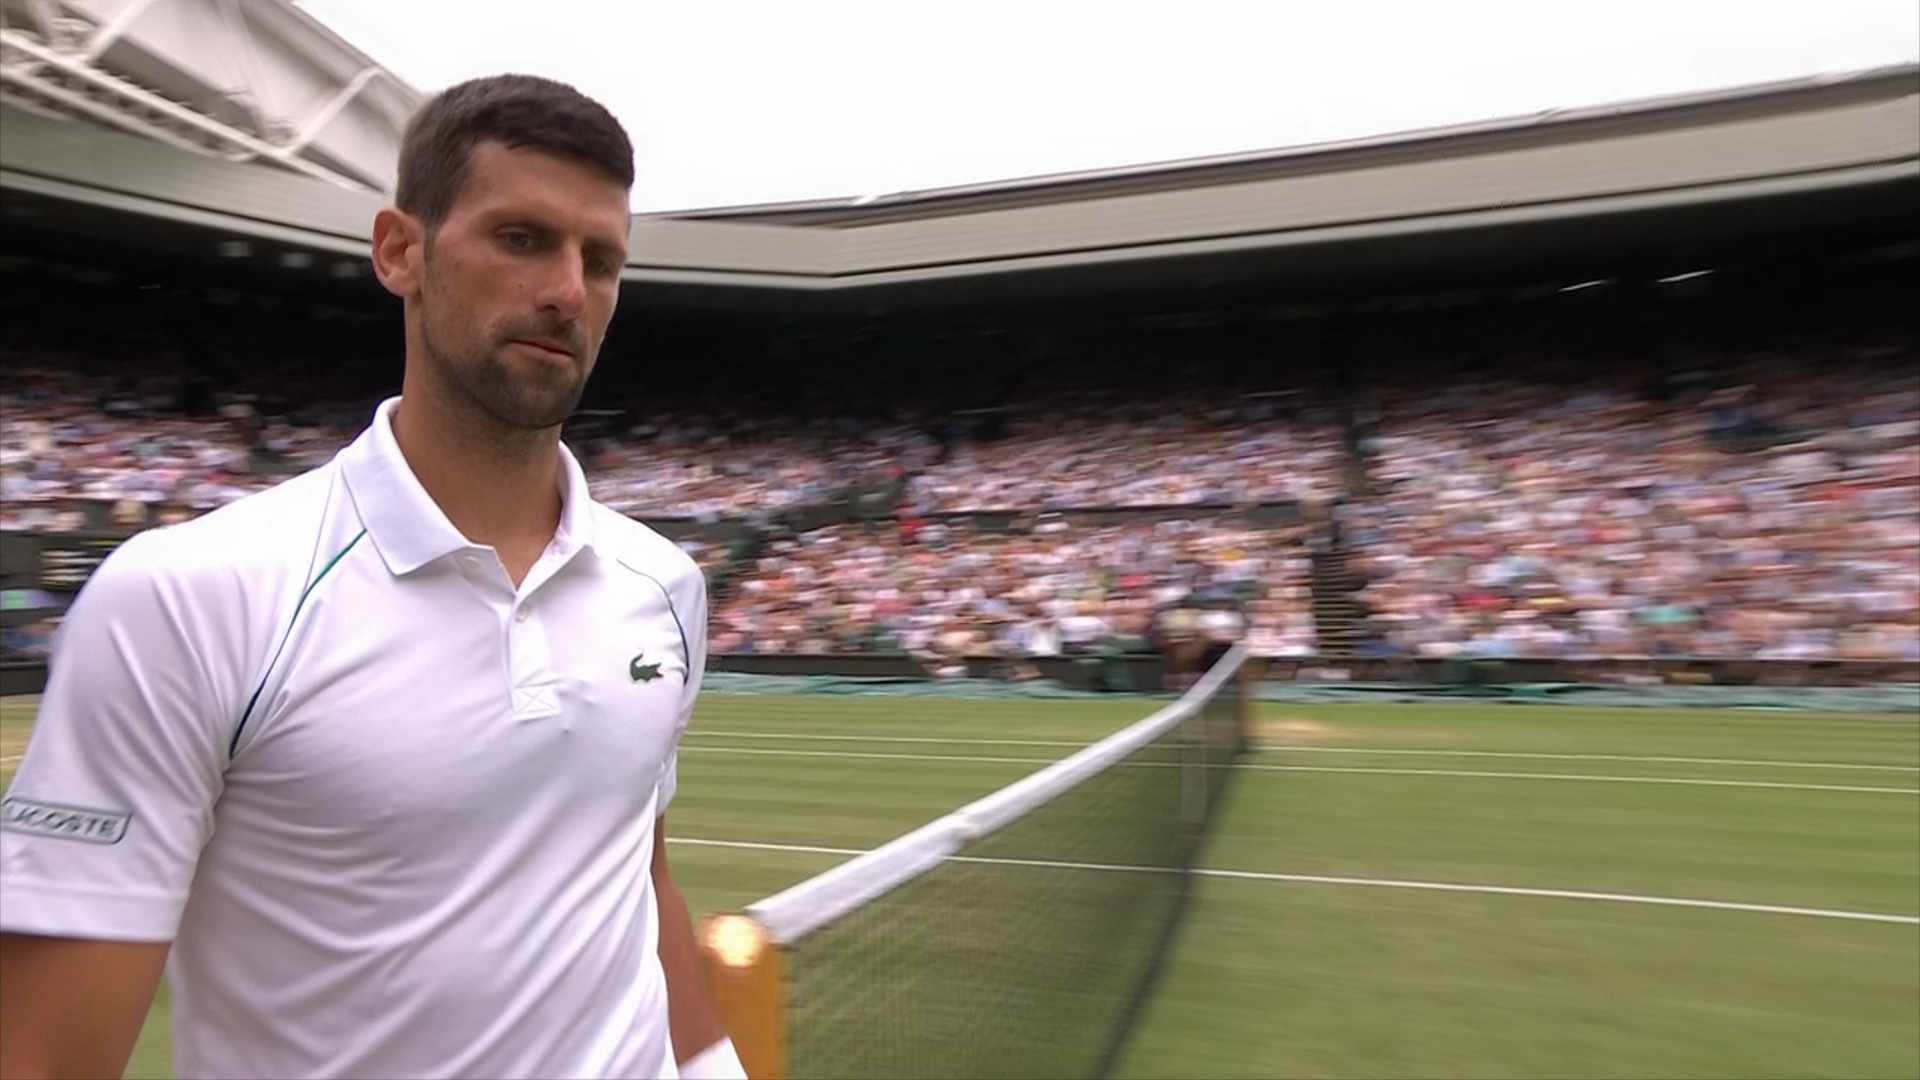 Djokovic body checks the camera after giving up serve to Sinner - Stream the Video